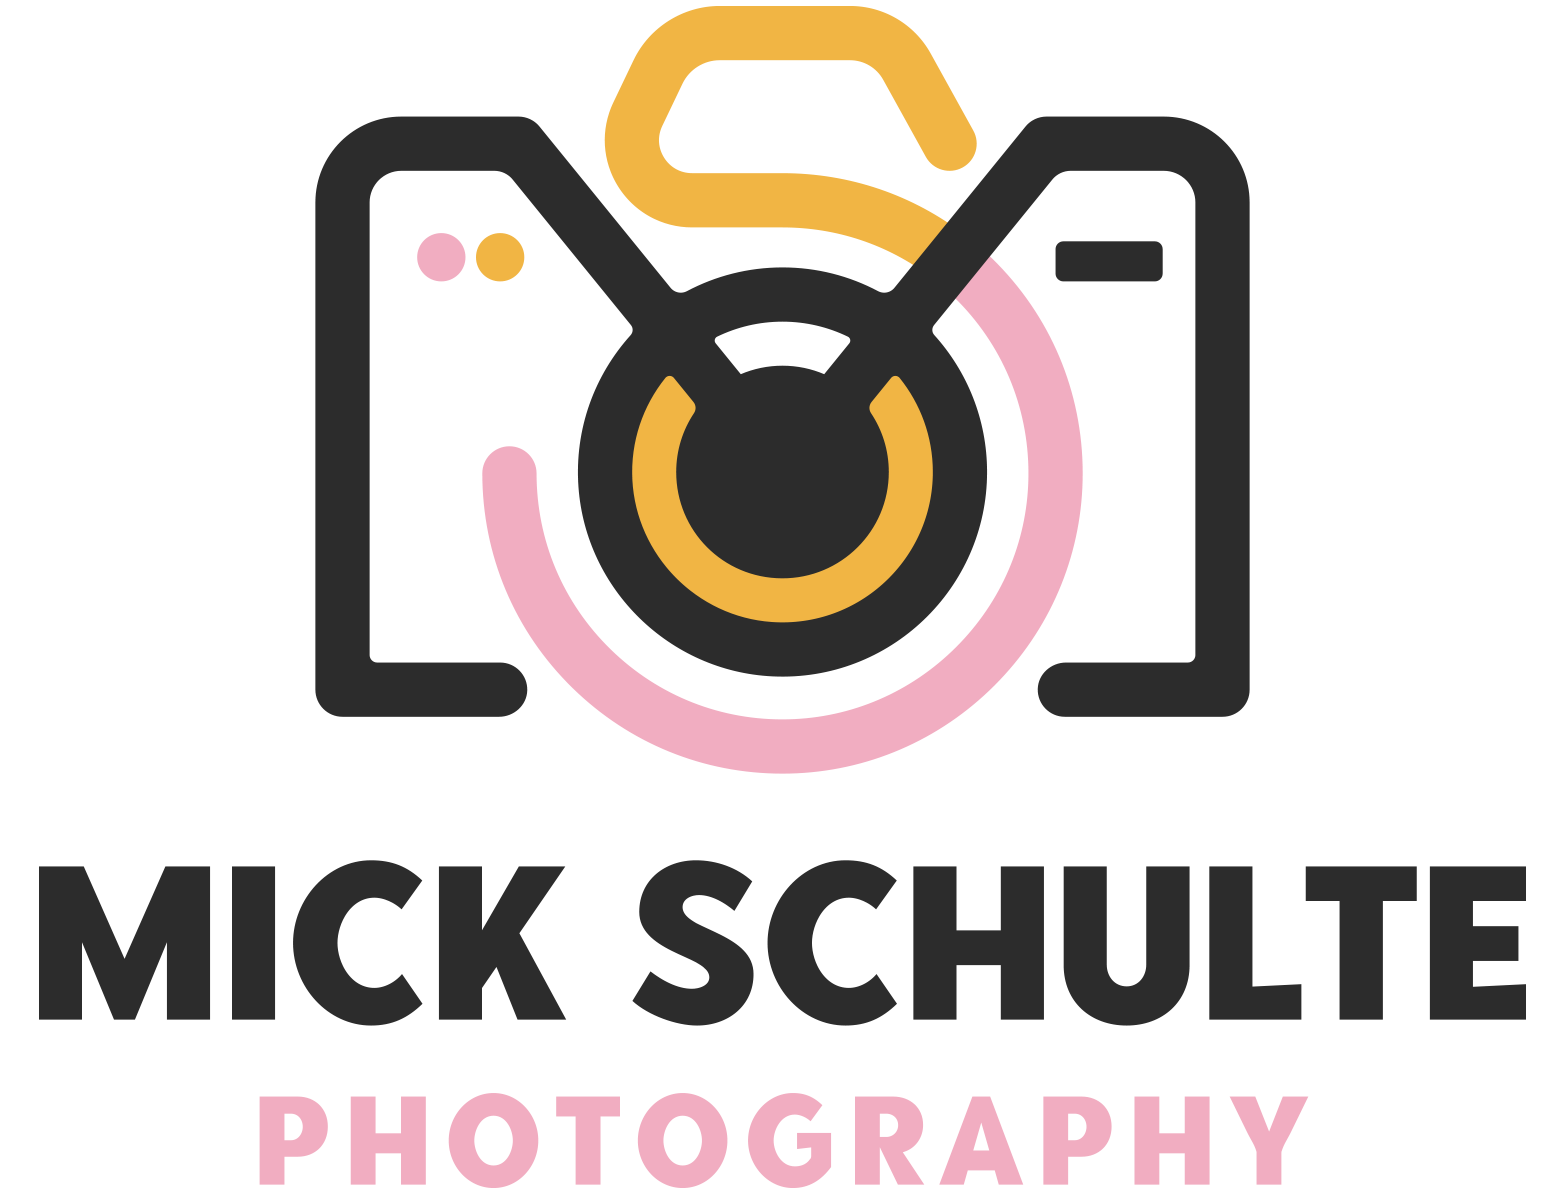 Mick Schulte Photography